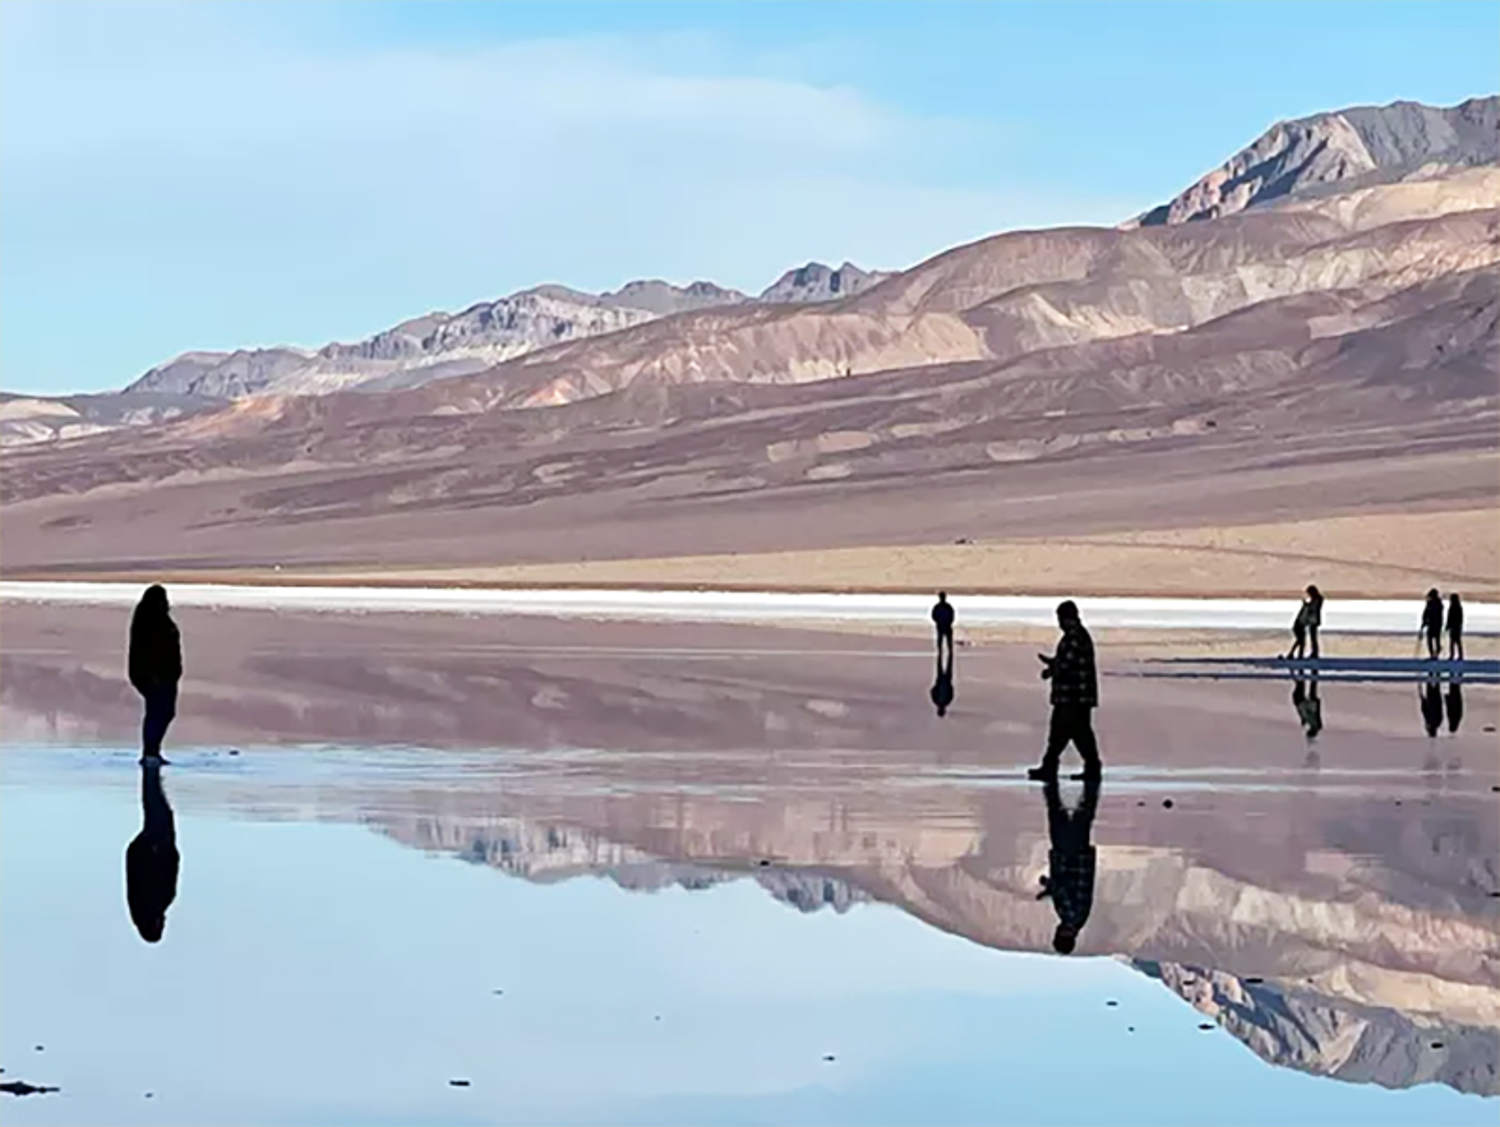 California rainstorms brought — and kept — a lake at Death Valley